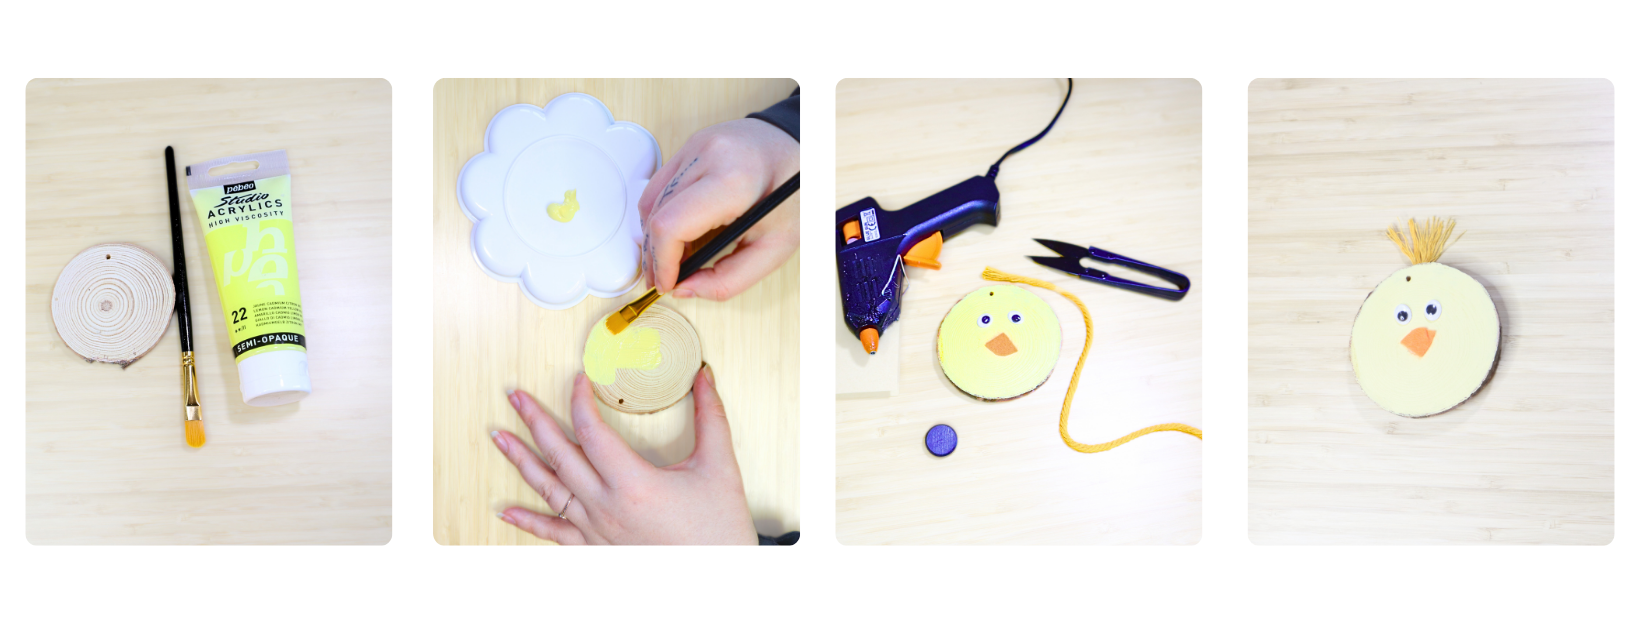 Last-Minute Easter Crafts: How to Make Adorable Magnetic Bunny and Chick Decorations